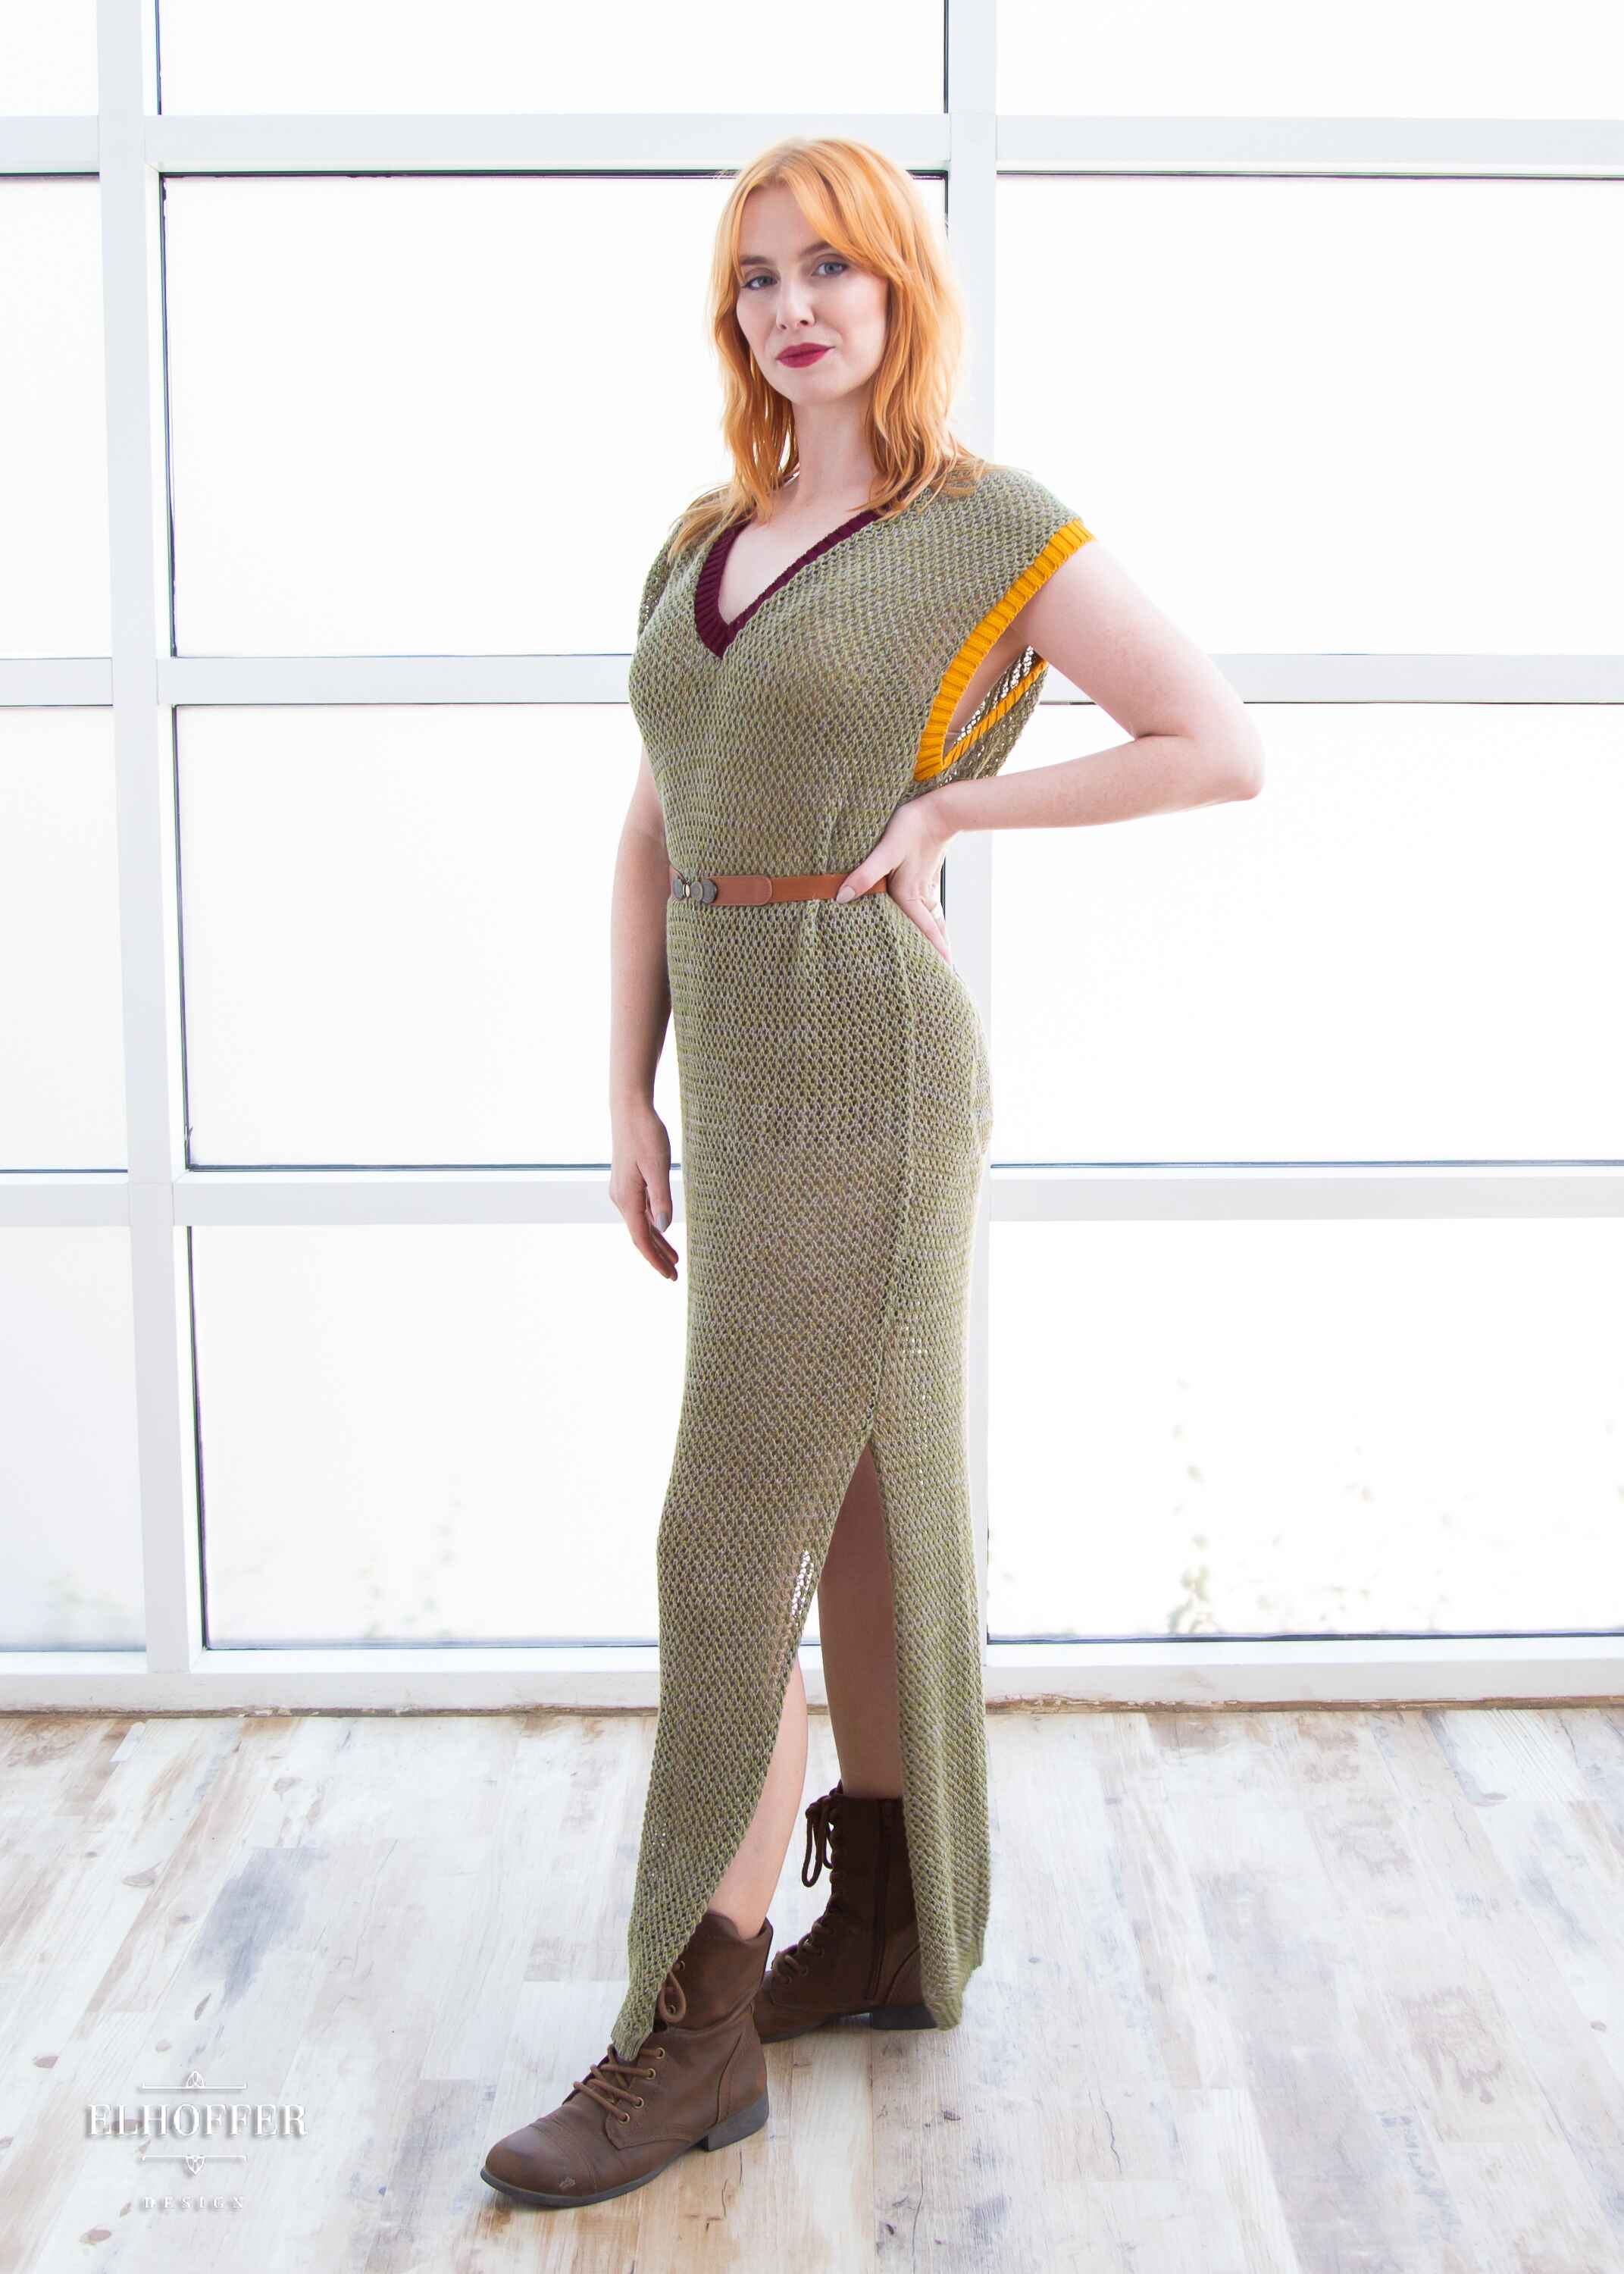 Harley, a fair skinned S model with shoulder length strawberry blonde hair, is wearing a long reversible sleeveless loose knit cover up with side slits.  The main body is an olive green with one side plain knit with a v neck and the other side having a subtle skull design with a scoop neck, the neckline is trimmed in crimson red, and the armholes are trimmed in a yellow.